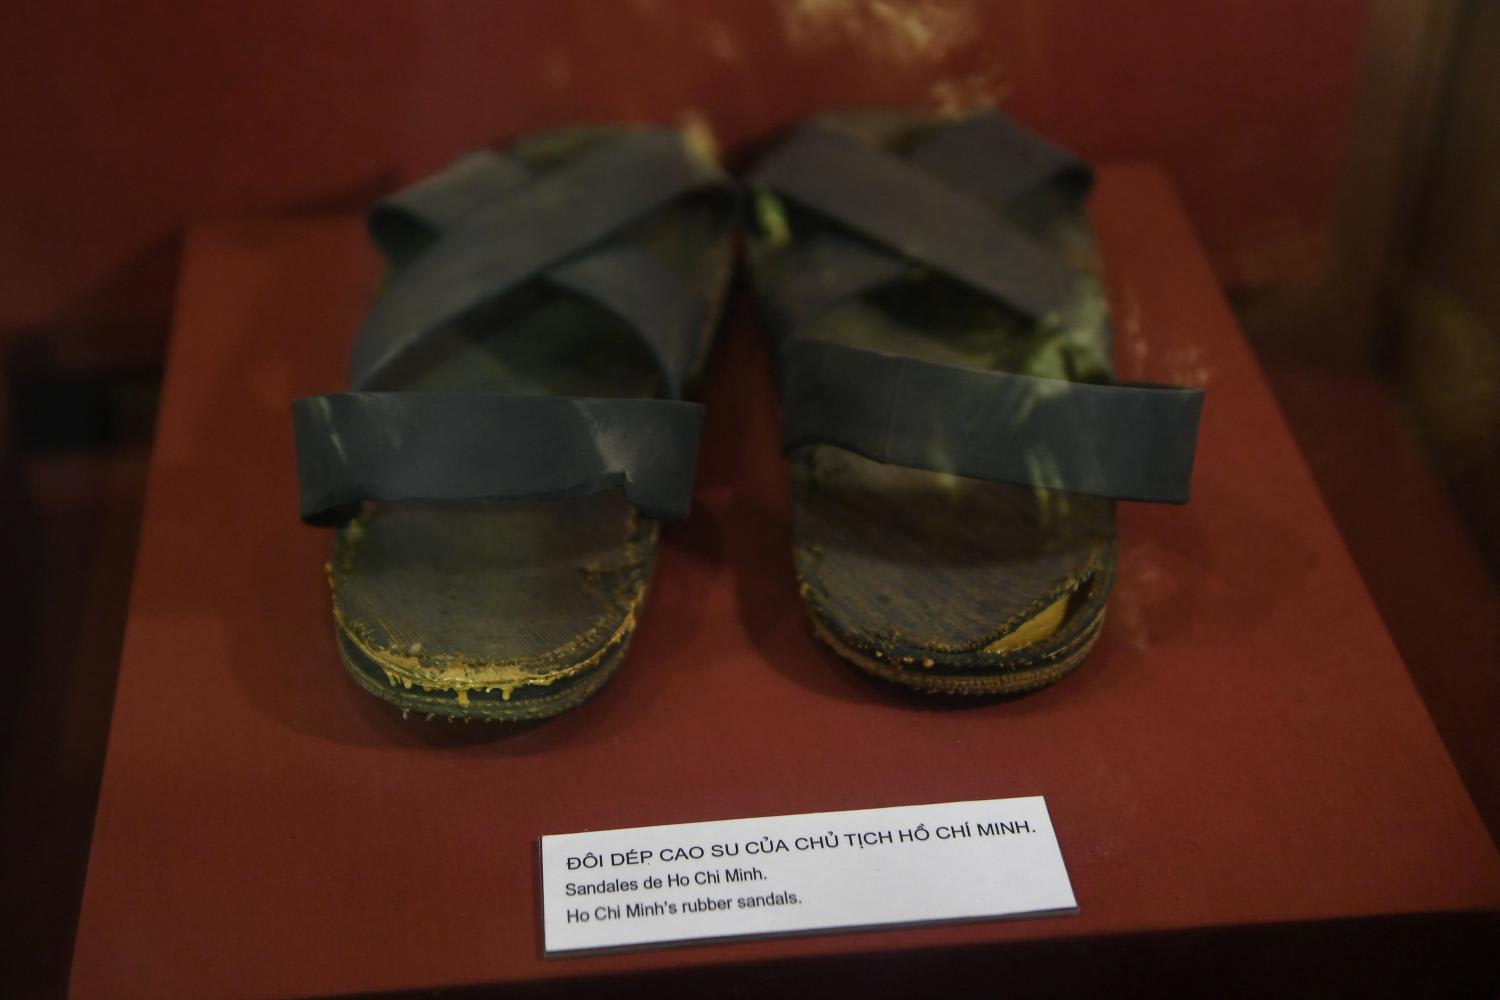 Former president Ho Chi Minh's rubber sandals inside the Ho Chi Minh museum in Hanoi seen on July 5, 2022.